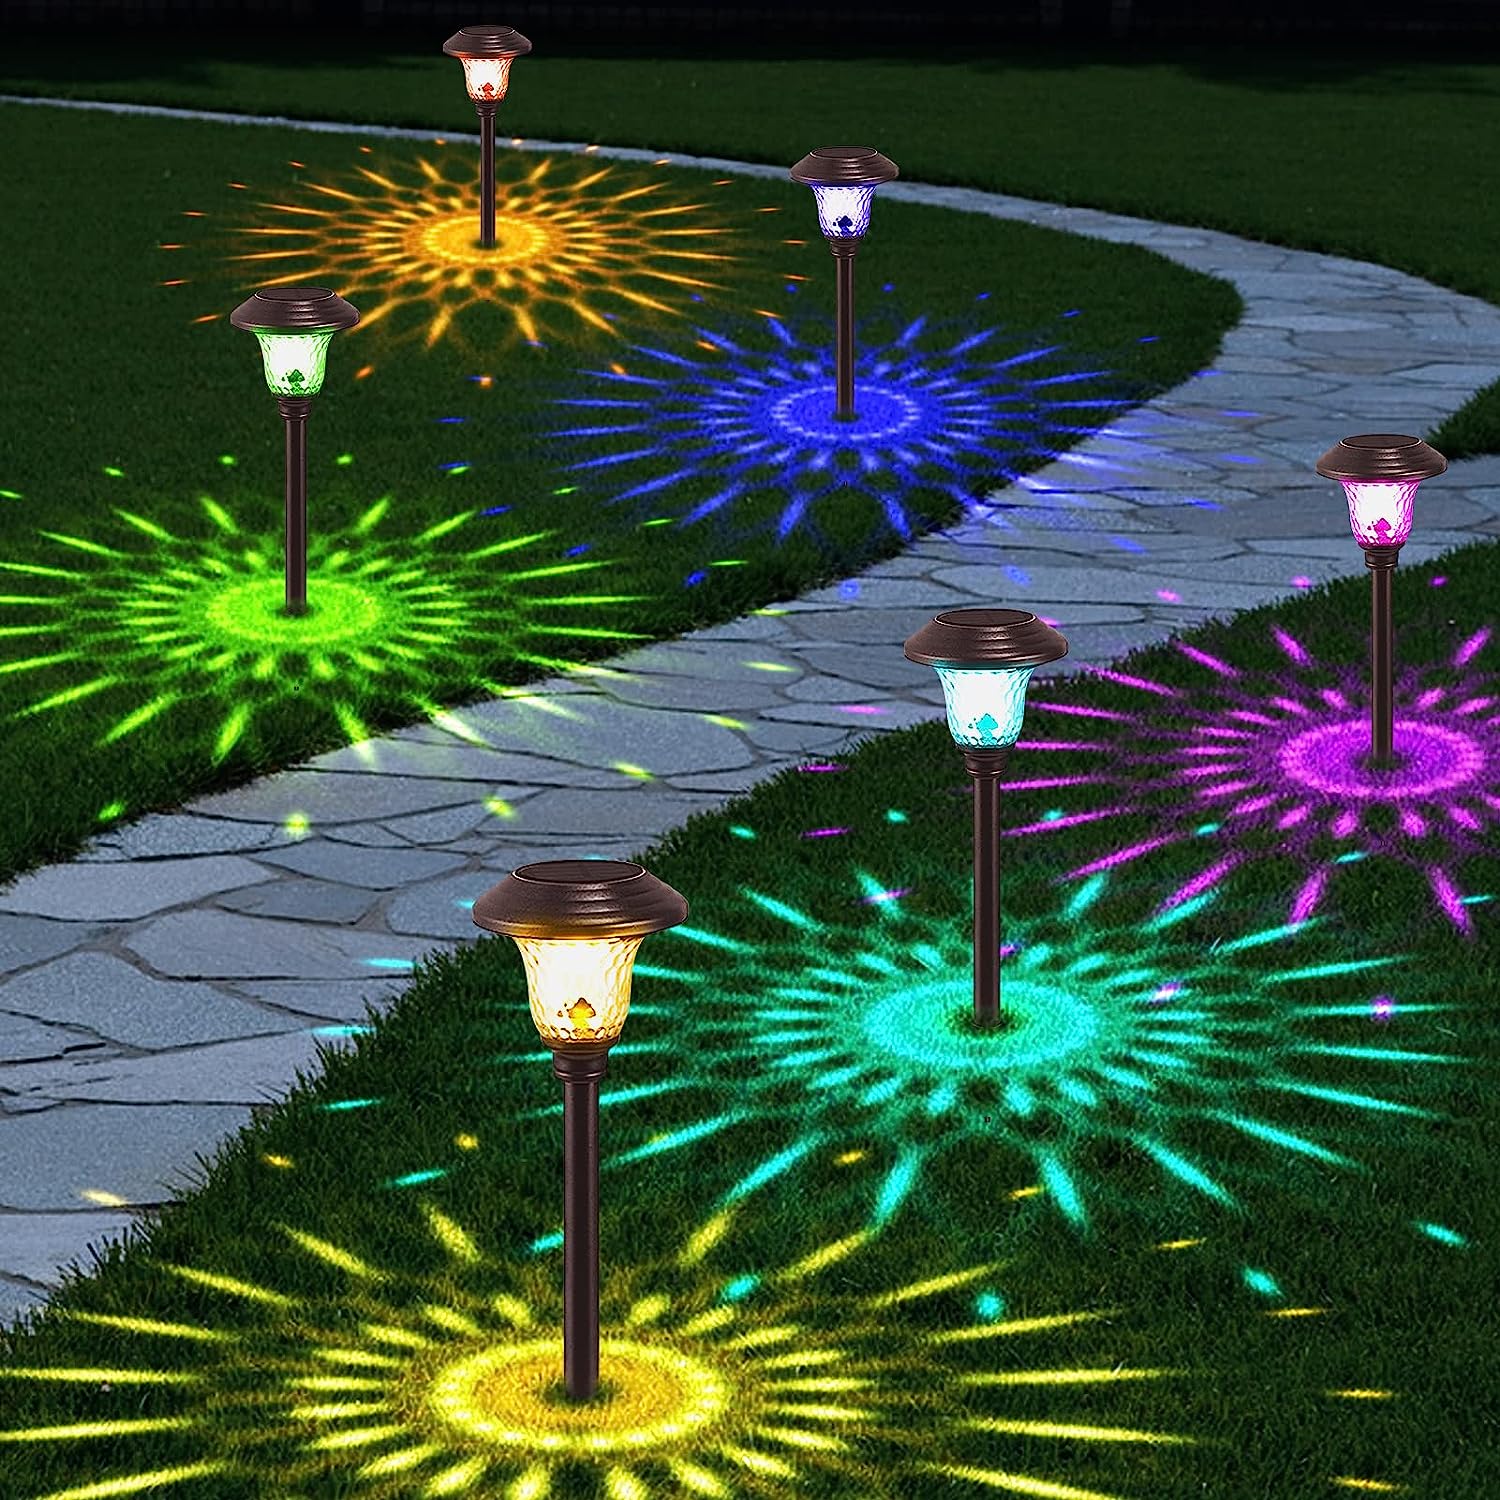 winding stone pathway lit by multi colored pathway lights casting patterns on the grass